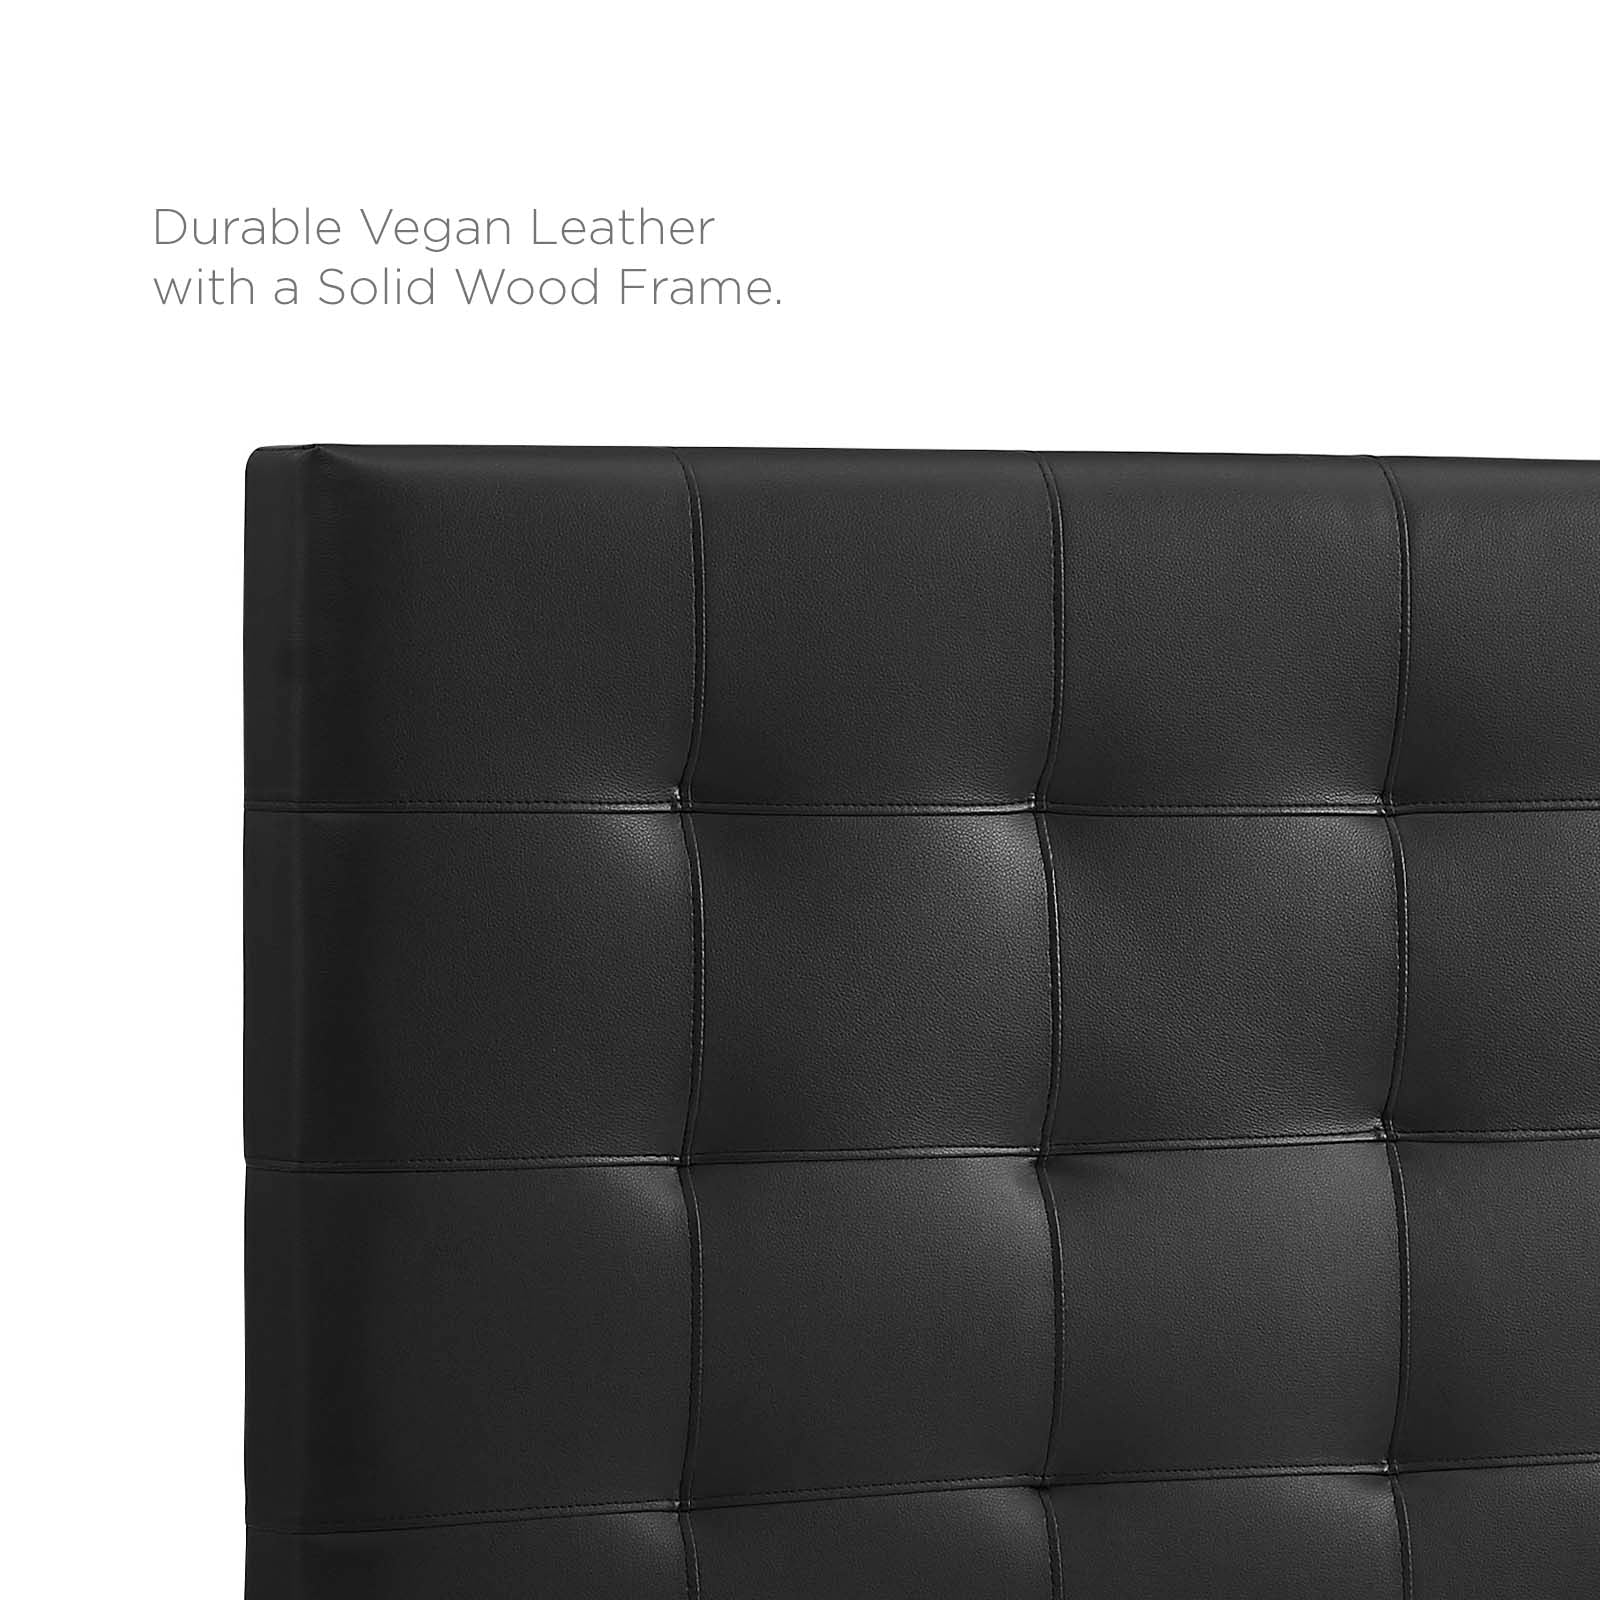 Modway Headboards - Paisley Tufted Full / Queen Upholstered Faux Leather Headboard Black